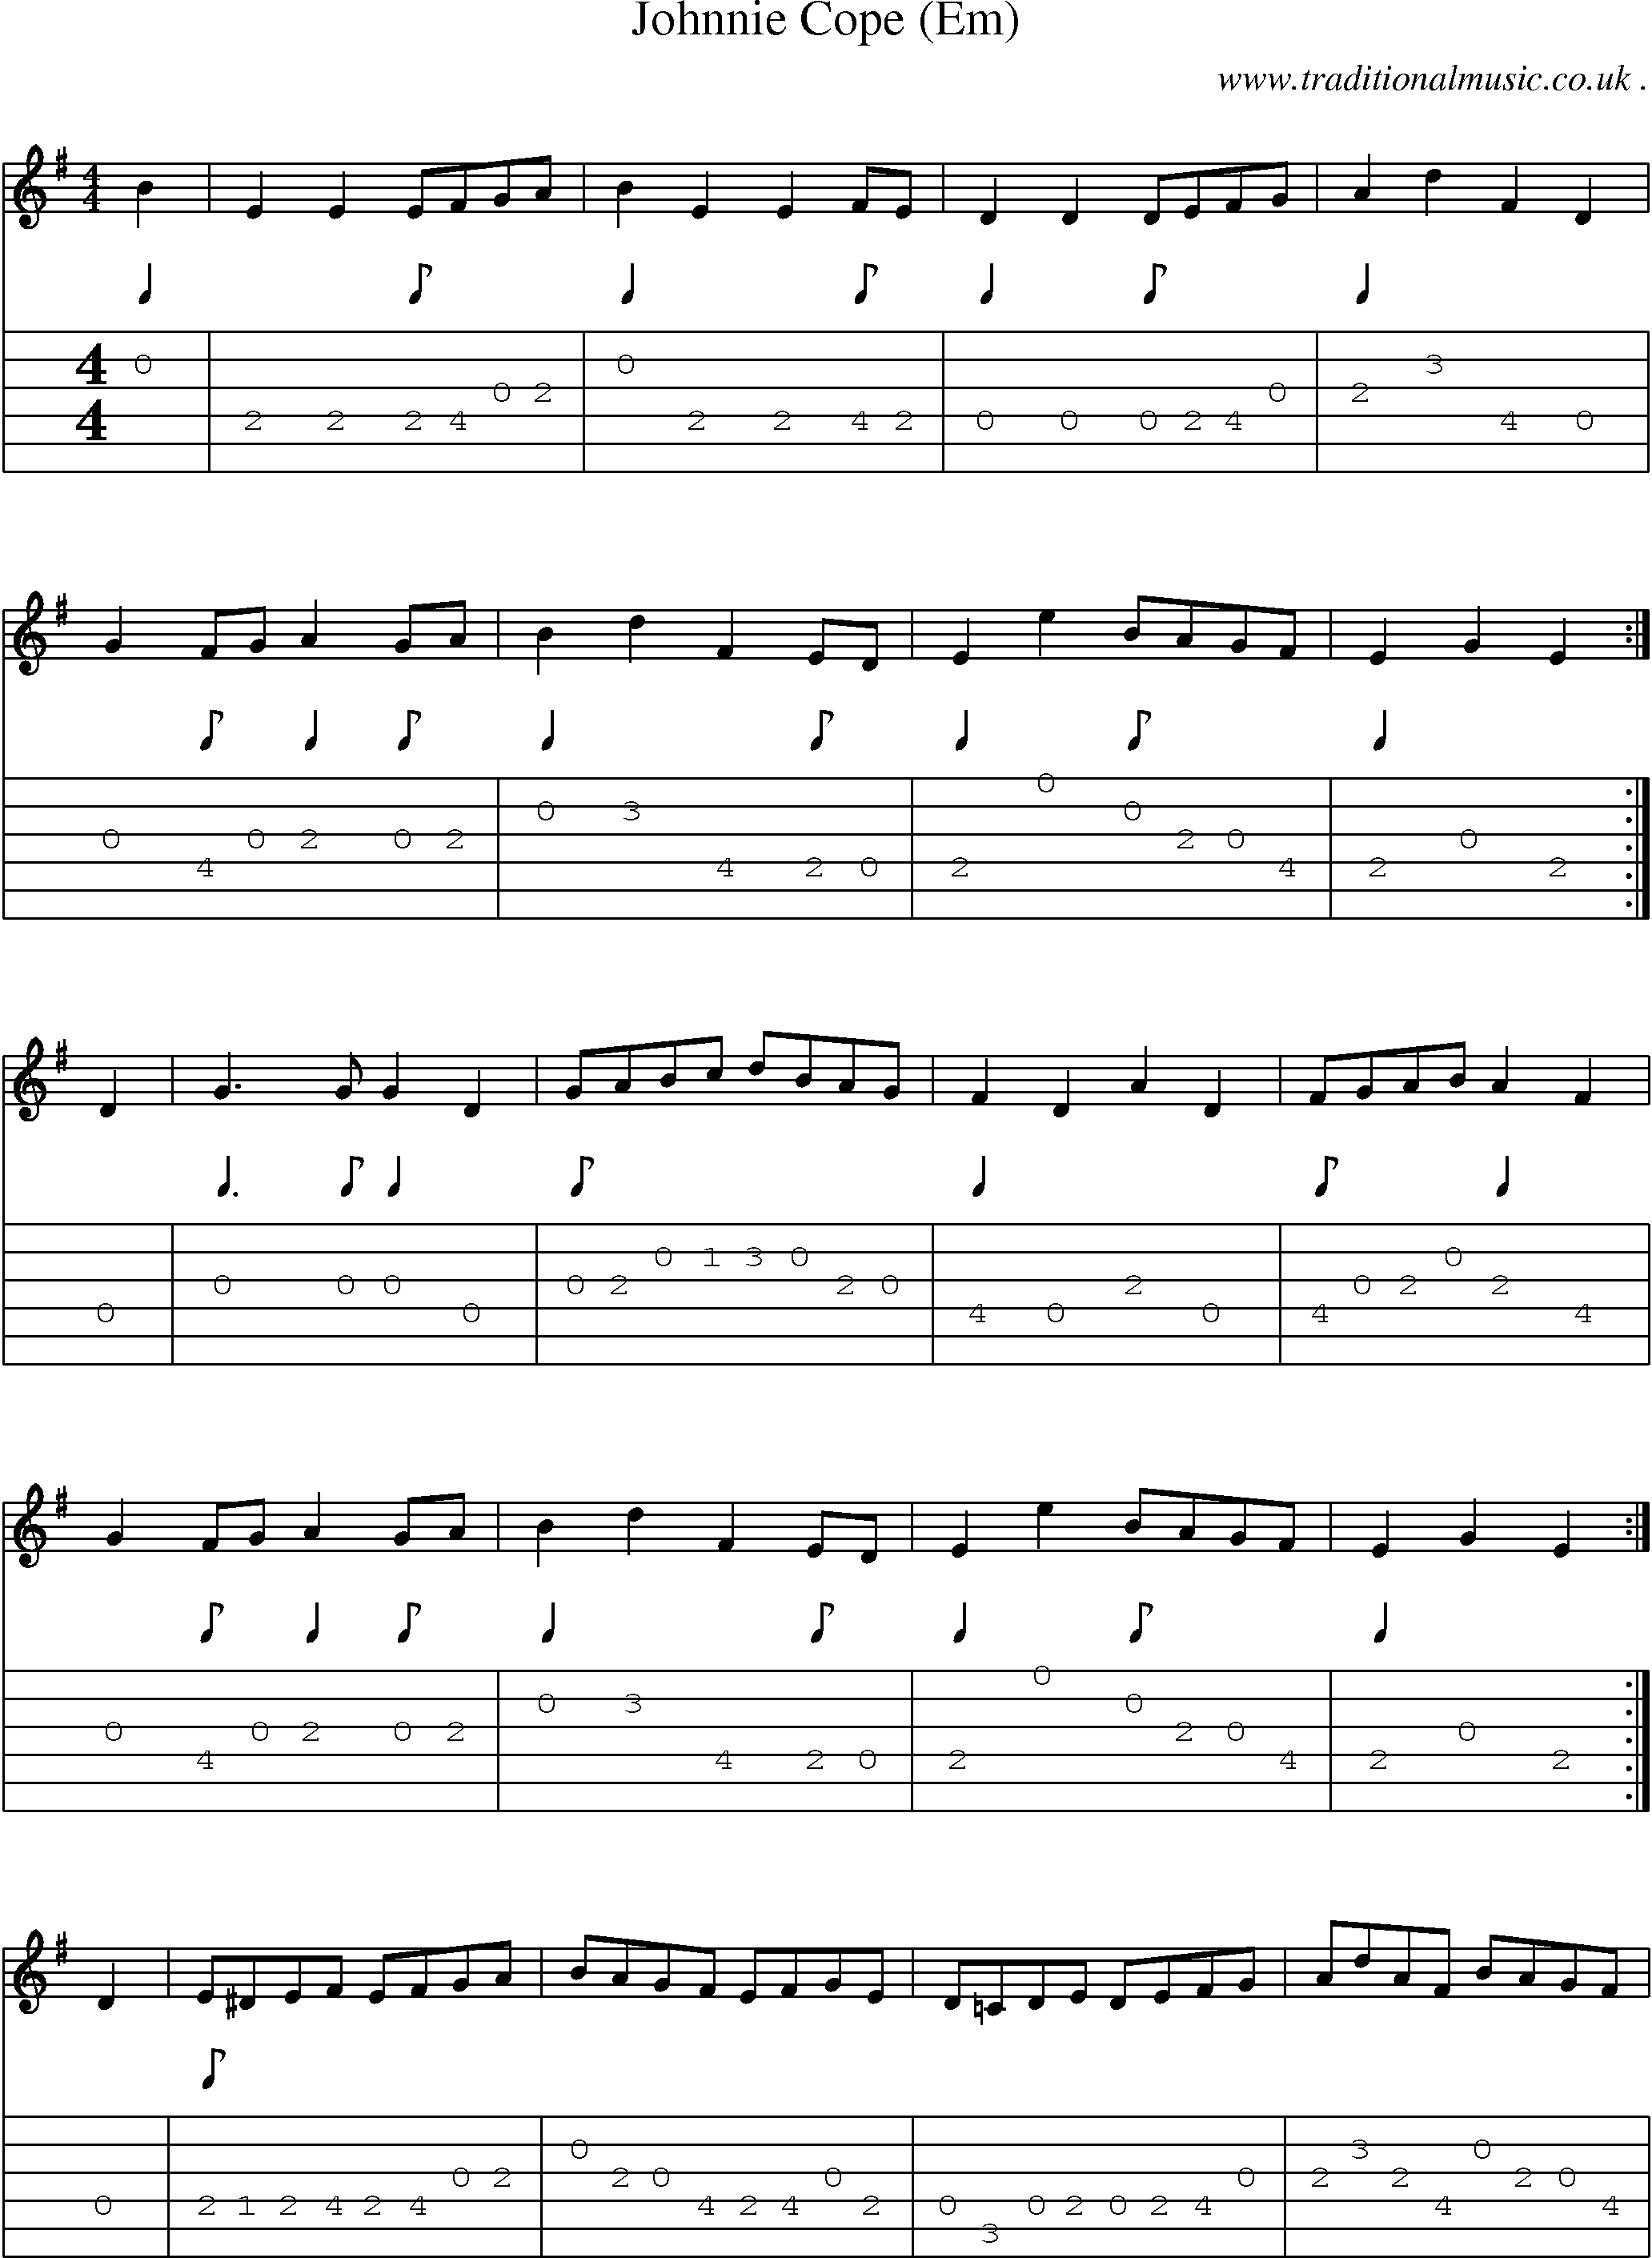 Sheet-music  score, Chords and Guitar Tabs for Johnnie Cope Em